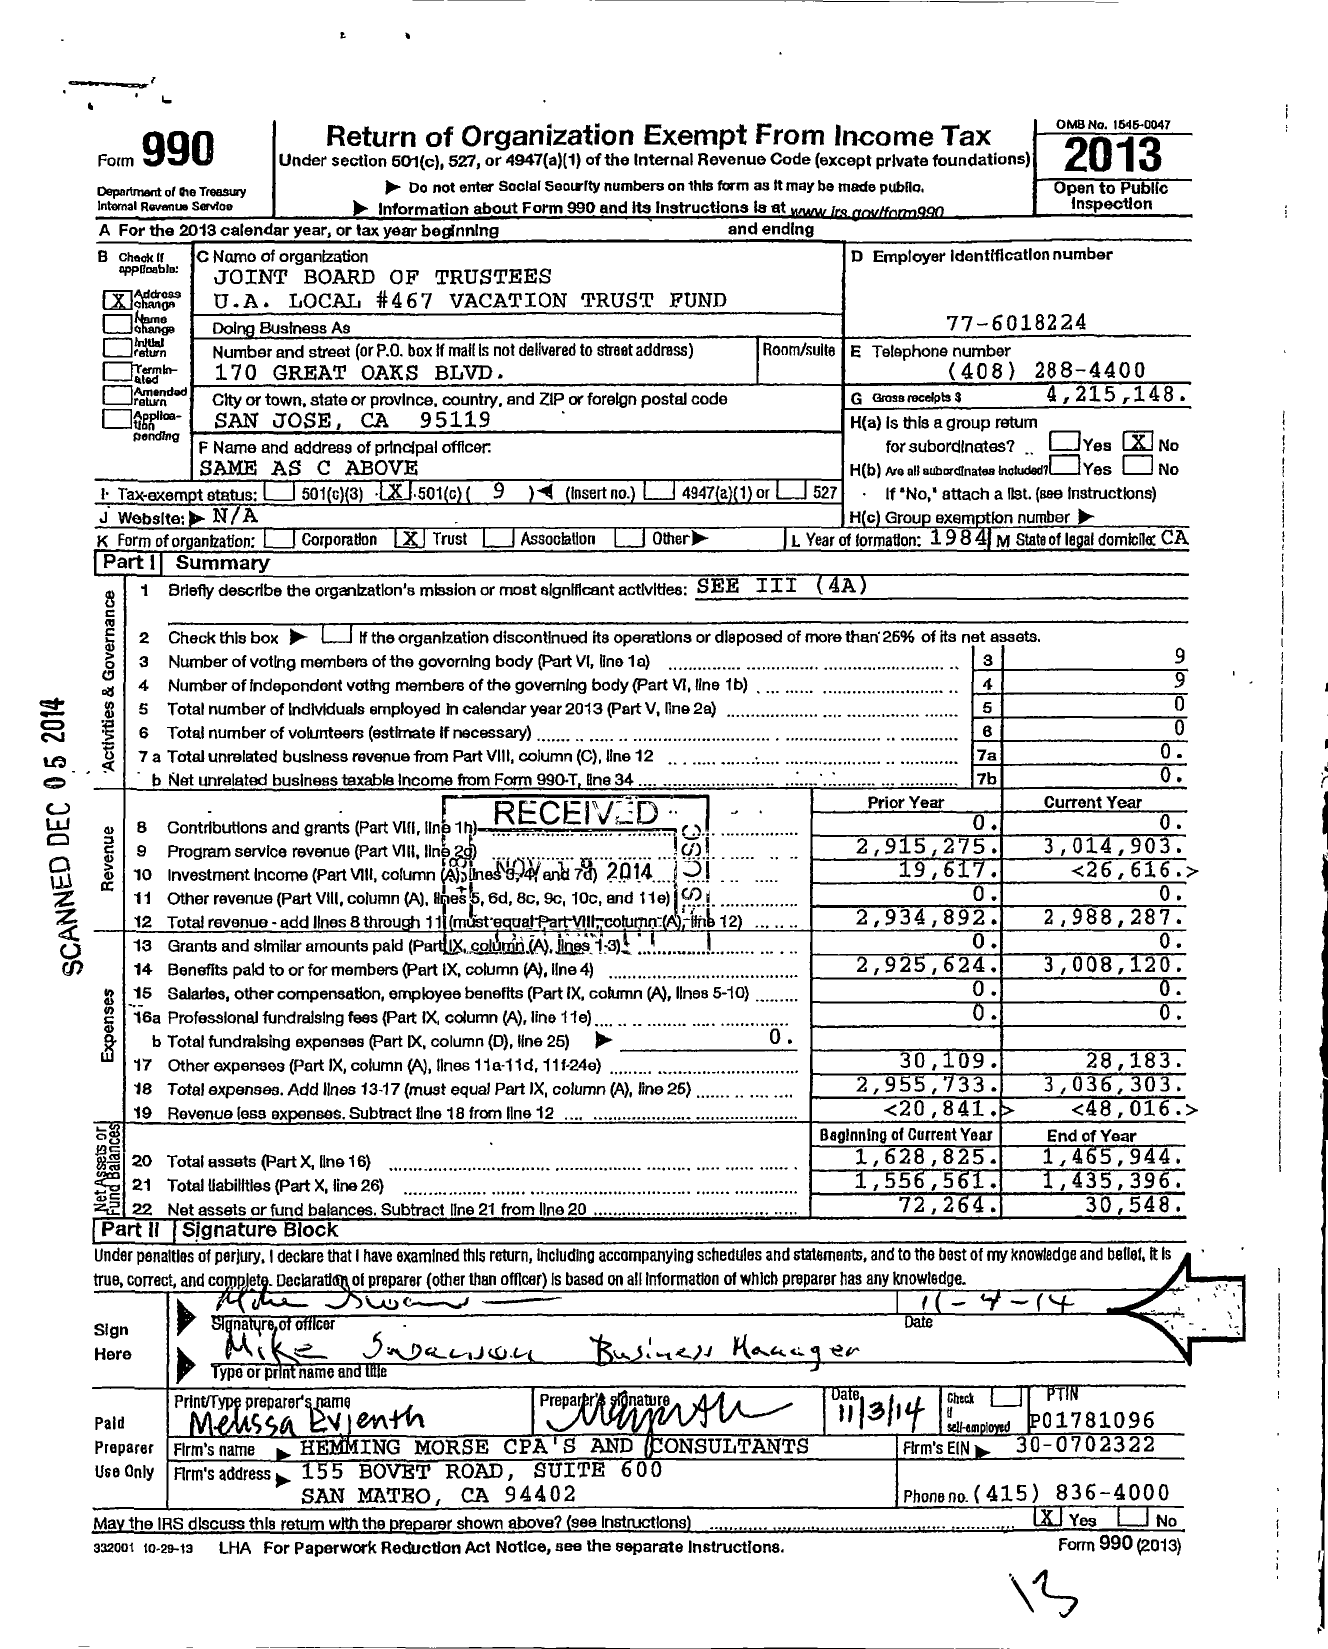 Image of first page of 2013 Form 990O for Joint Board of Trustees Local #467 Vacation Trust Fund